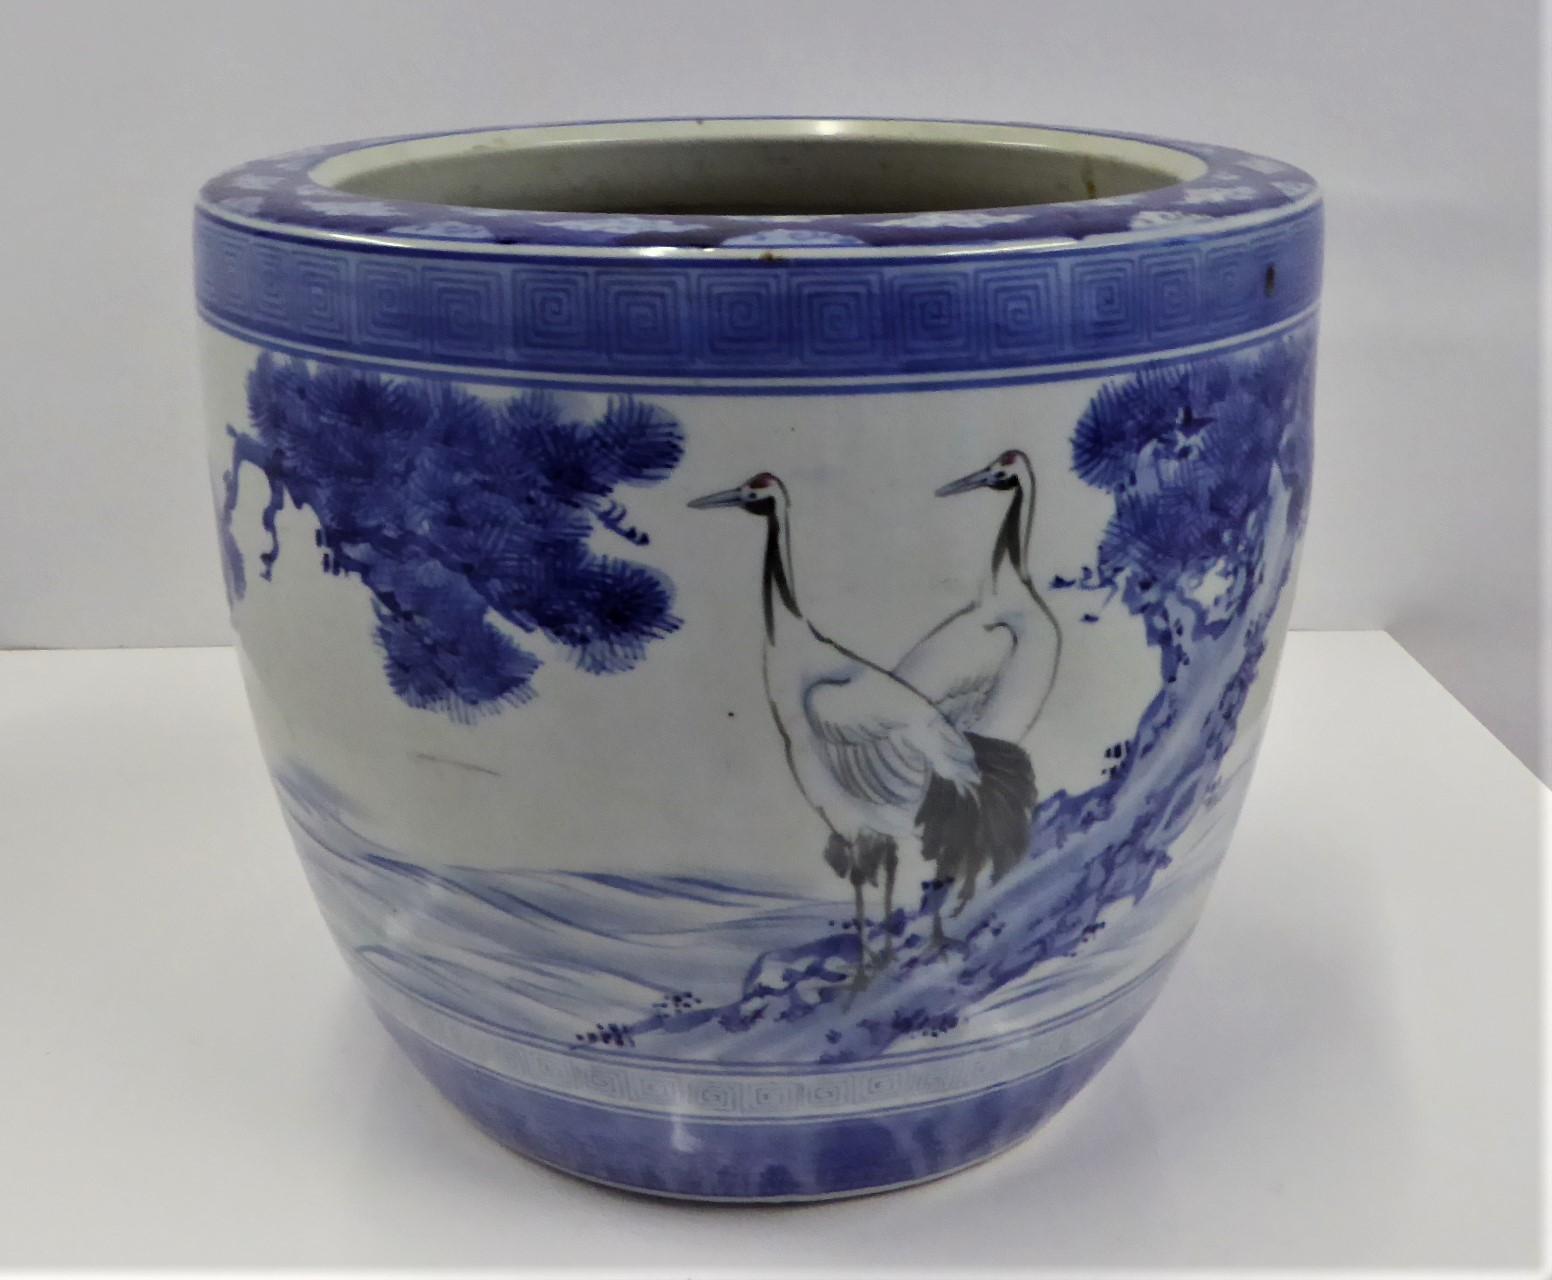 Lovely blue and white 1950s Japanese ceramic Hibachi with underglaze hand painted decoration of cranes, pine trees and mountains. The design is of 2 cranes perched on the trunk of a pine tree while another crane is in flight. Symbolism of Cranes -